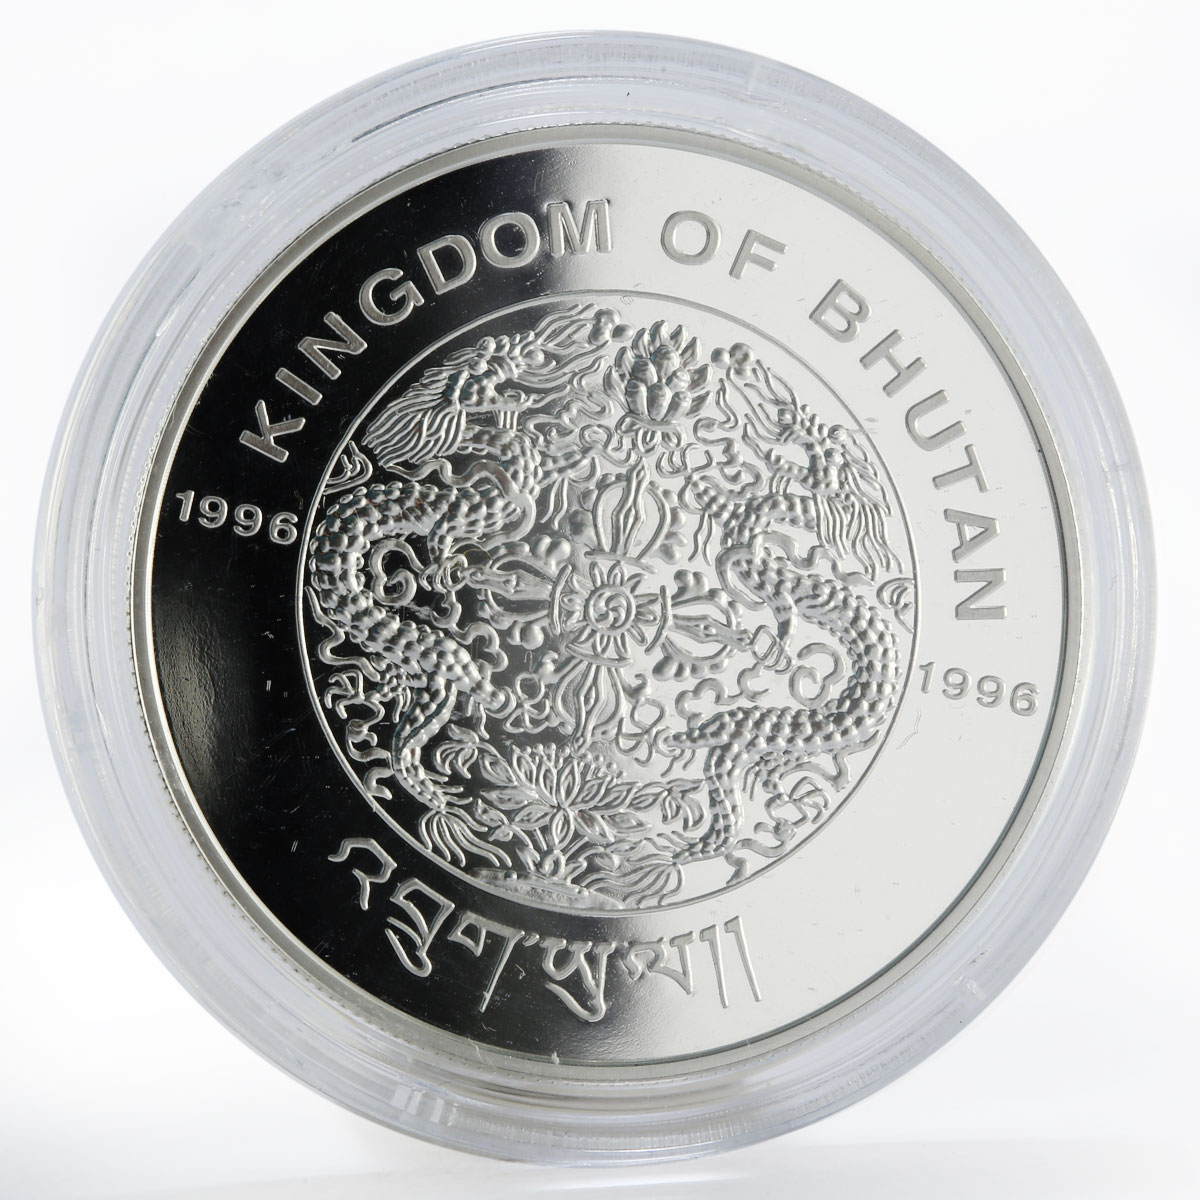 Bhutan 300 ngultrums Year of the Tiger proof silver coin 1996